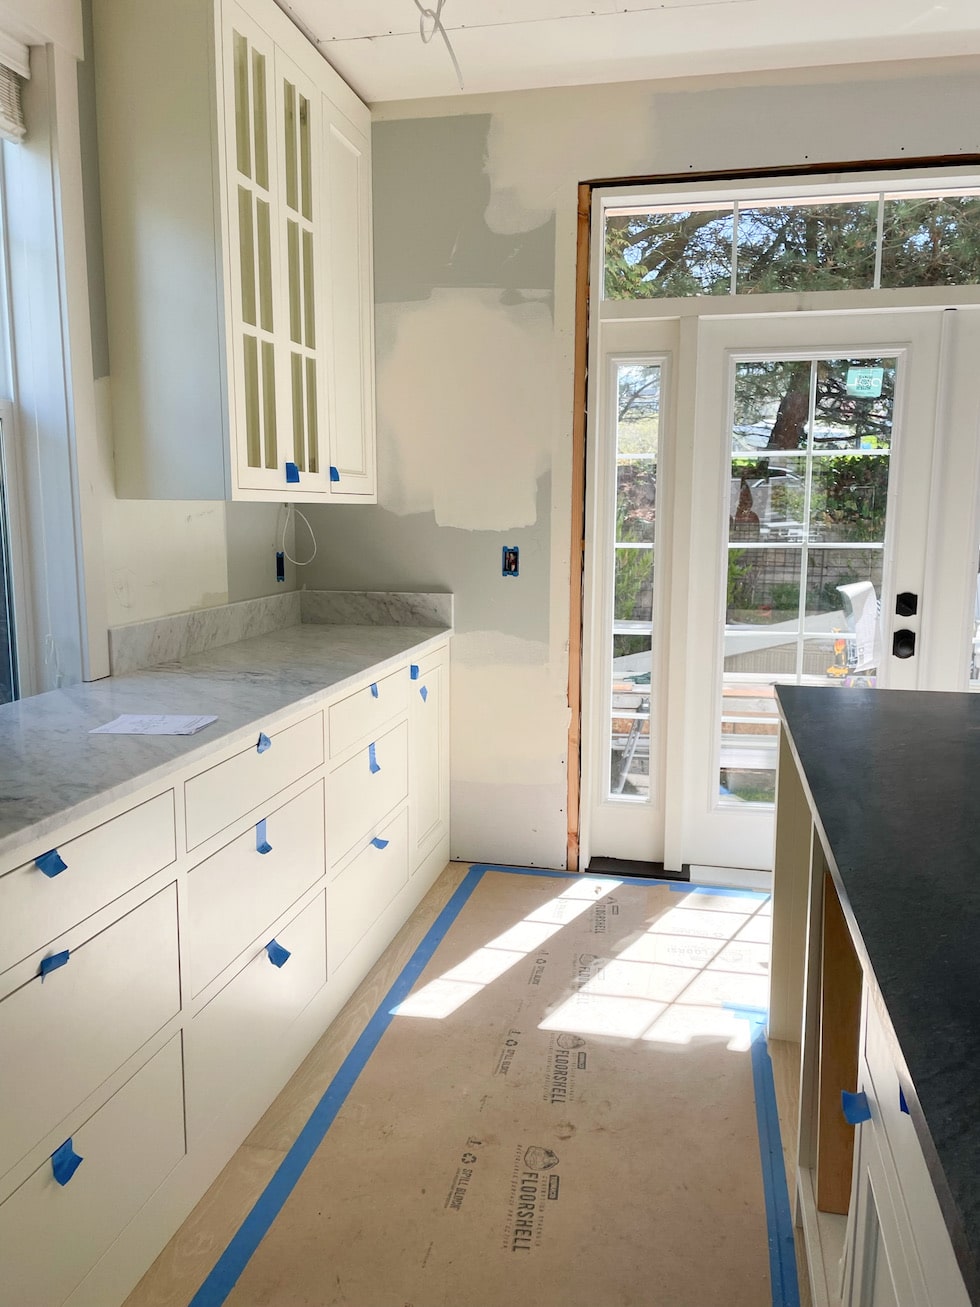 Kitchen Renovation Update: Marble, Soapstone, French Doors and Beadboard!